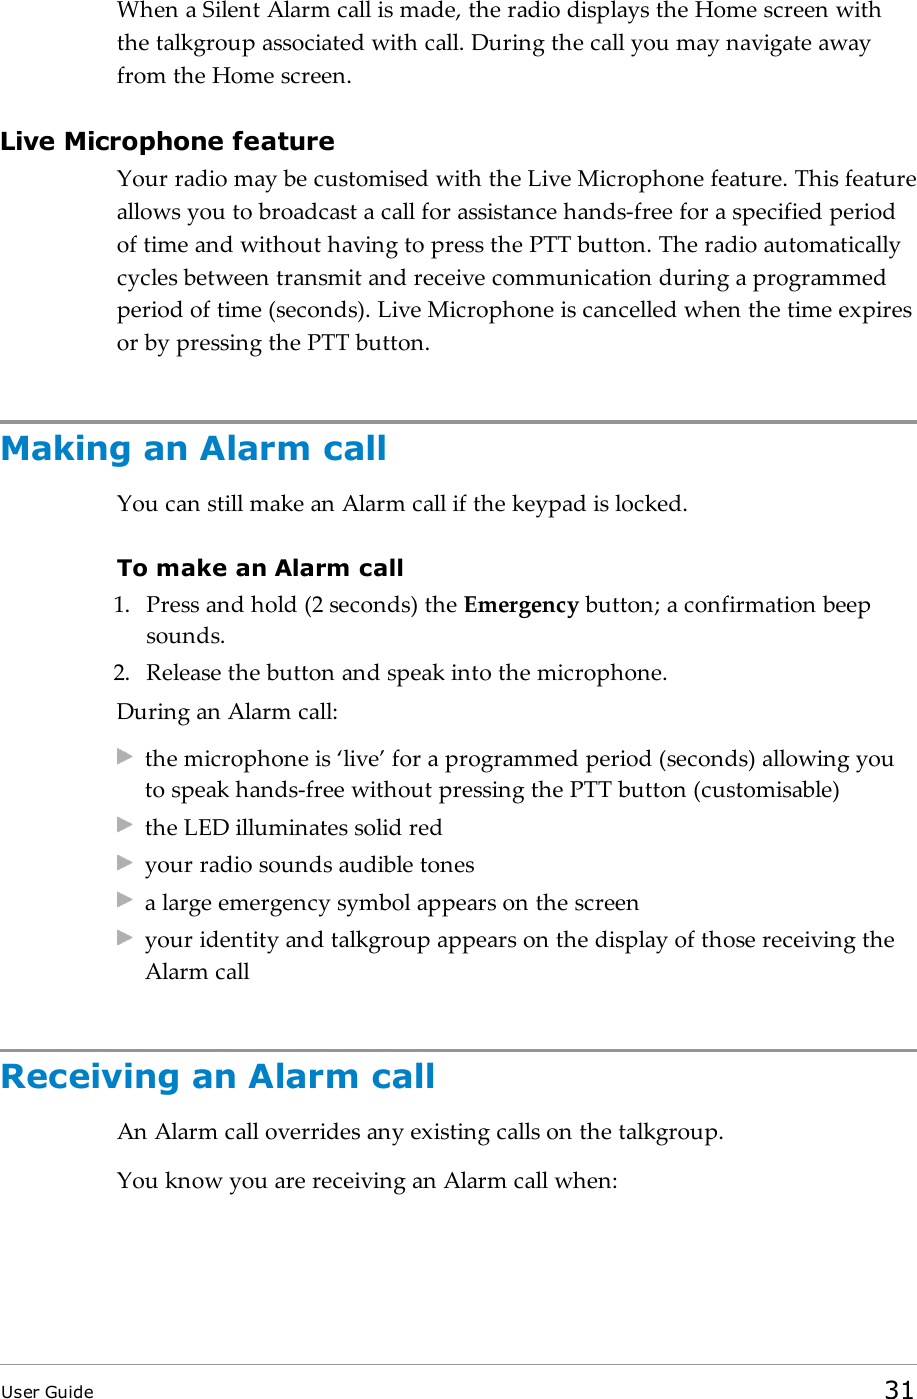 When a Silent Alarm call is made, the radio displays the Home screen withthe talkgroup associated with call. During the call you may navigate awayfrom the Home screen.Live Microphone featureYour radio may be customised with the Live Microphone feature. This featureallows you to broadcast a call for assistance hands-free for a specified periodof time and without having to press the PTT button. The radio automaticallycycles between transmit and receive communication during a programmedperiod of time (seconds). Live Microphone is cancelled when the time expiresor by pressing the PTT button.Making an Alarm callYou can still make an Alarm call if the keypad is locked.To make an Alarm call1. Press and hold (2 seconds) the Emergency button; a confirmation beepsounds.2. Release the button and speak into the microphone.During an Alarm call:the microphone is ‘live’ for a programmed period (seconds) allowing youto speak hands-free without pressing the PTT button (customisable)the LED illuminates solid redyour radio sounds audible tonesa large emergency symbol appears on the screenyour identity and talkgroup appears on the display of those receiving theAlarm callReceiving an Alarm callAn Alarm call overrides any existing calls on the talkgroup.You know you are receiving an Alarm call when:User Guide 31